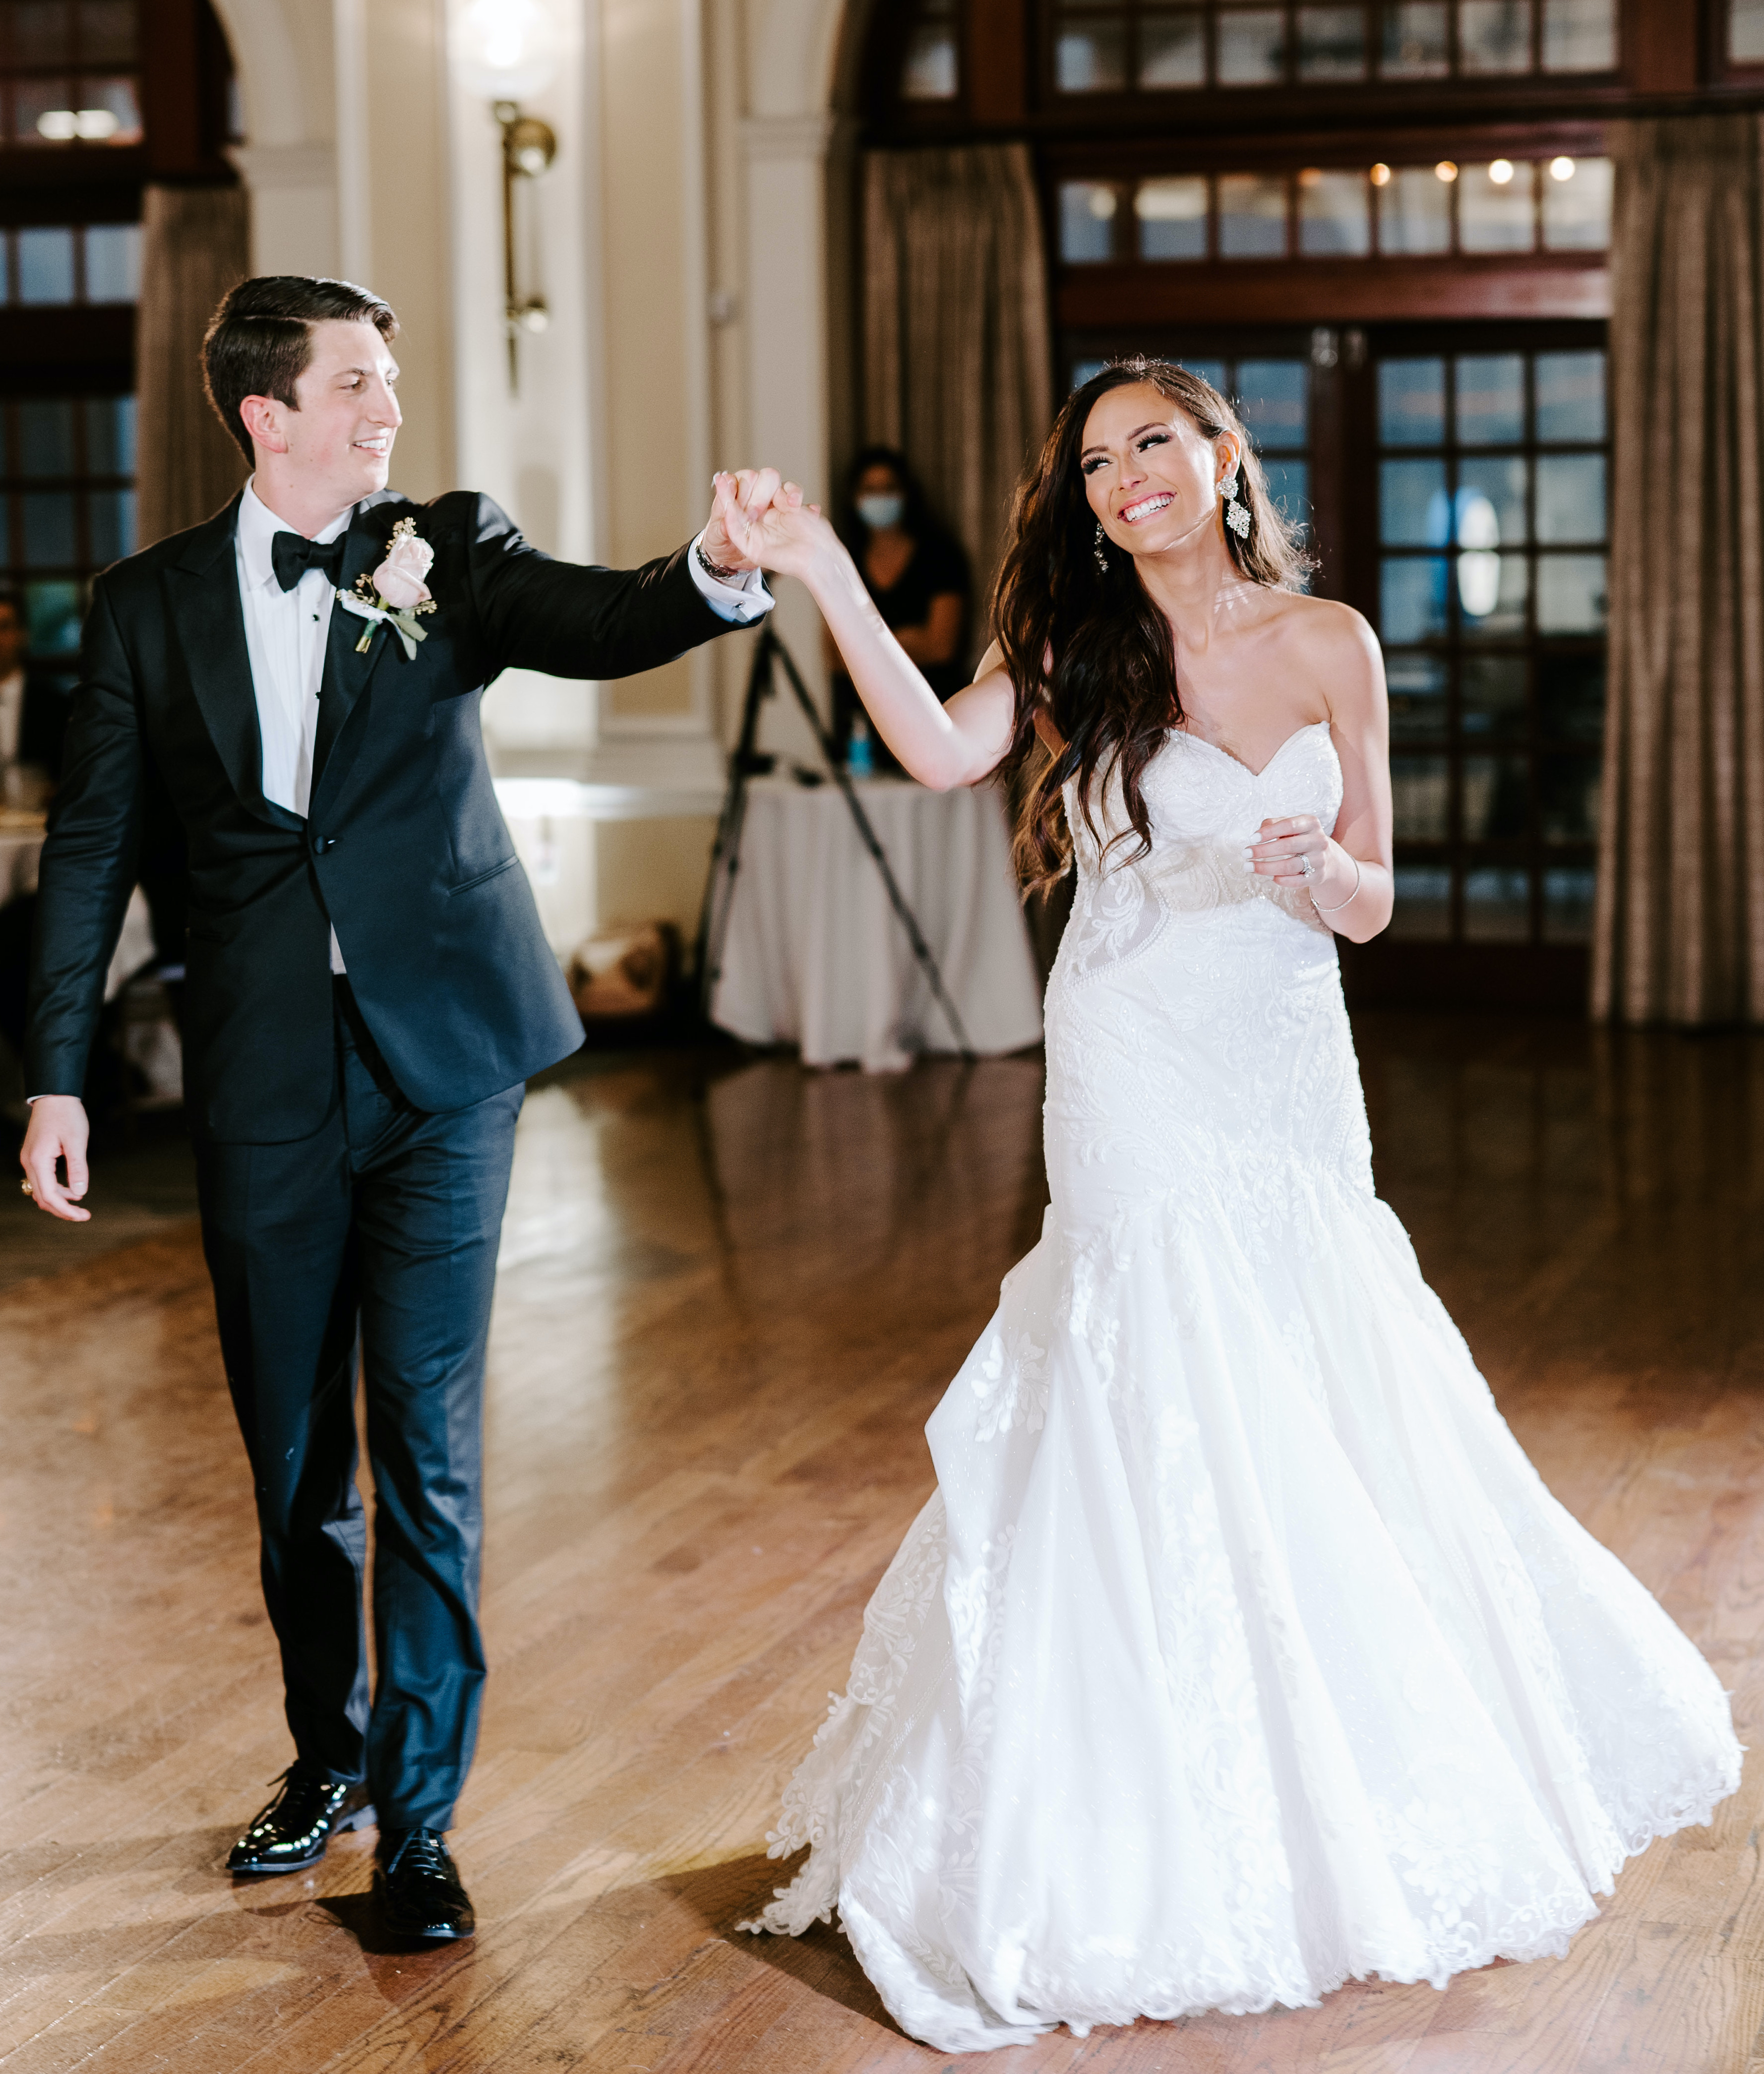 The groom twirls his bride during the first dance of the elegant rainy wedding.